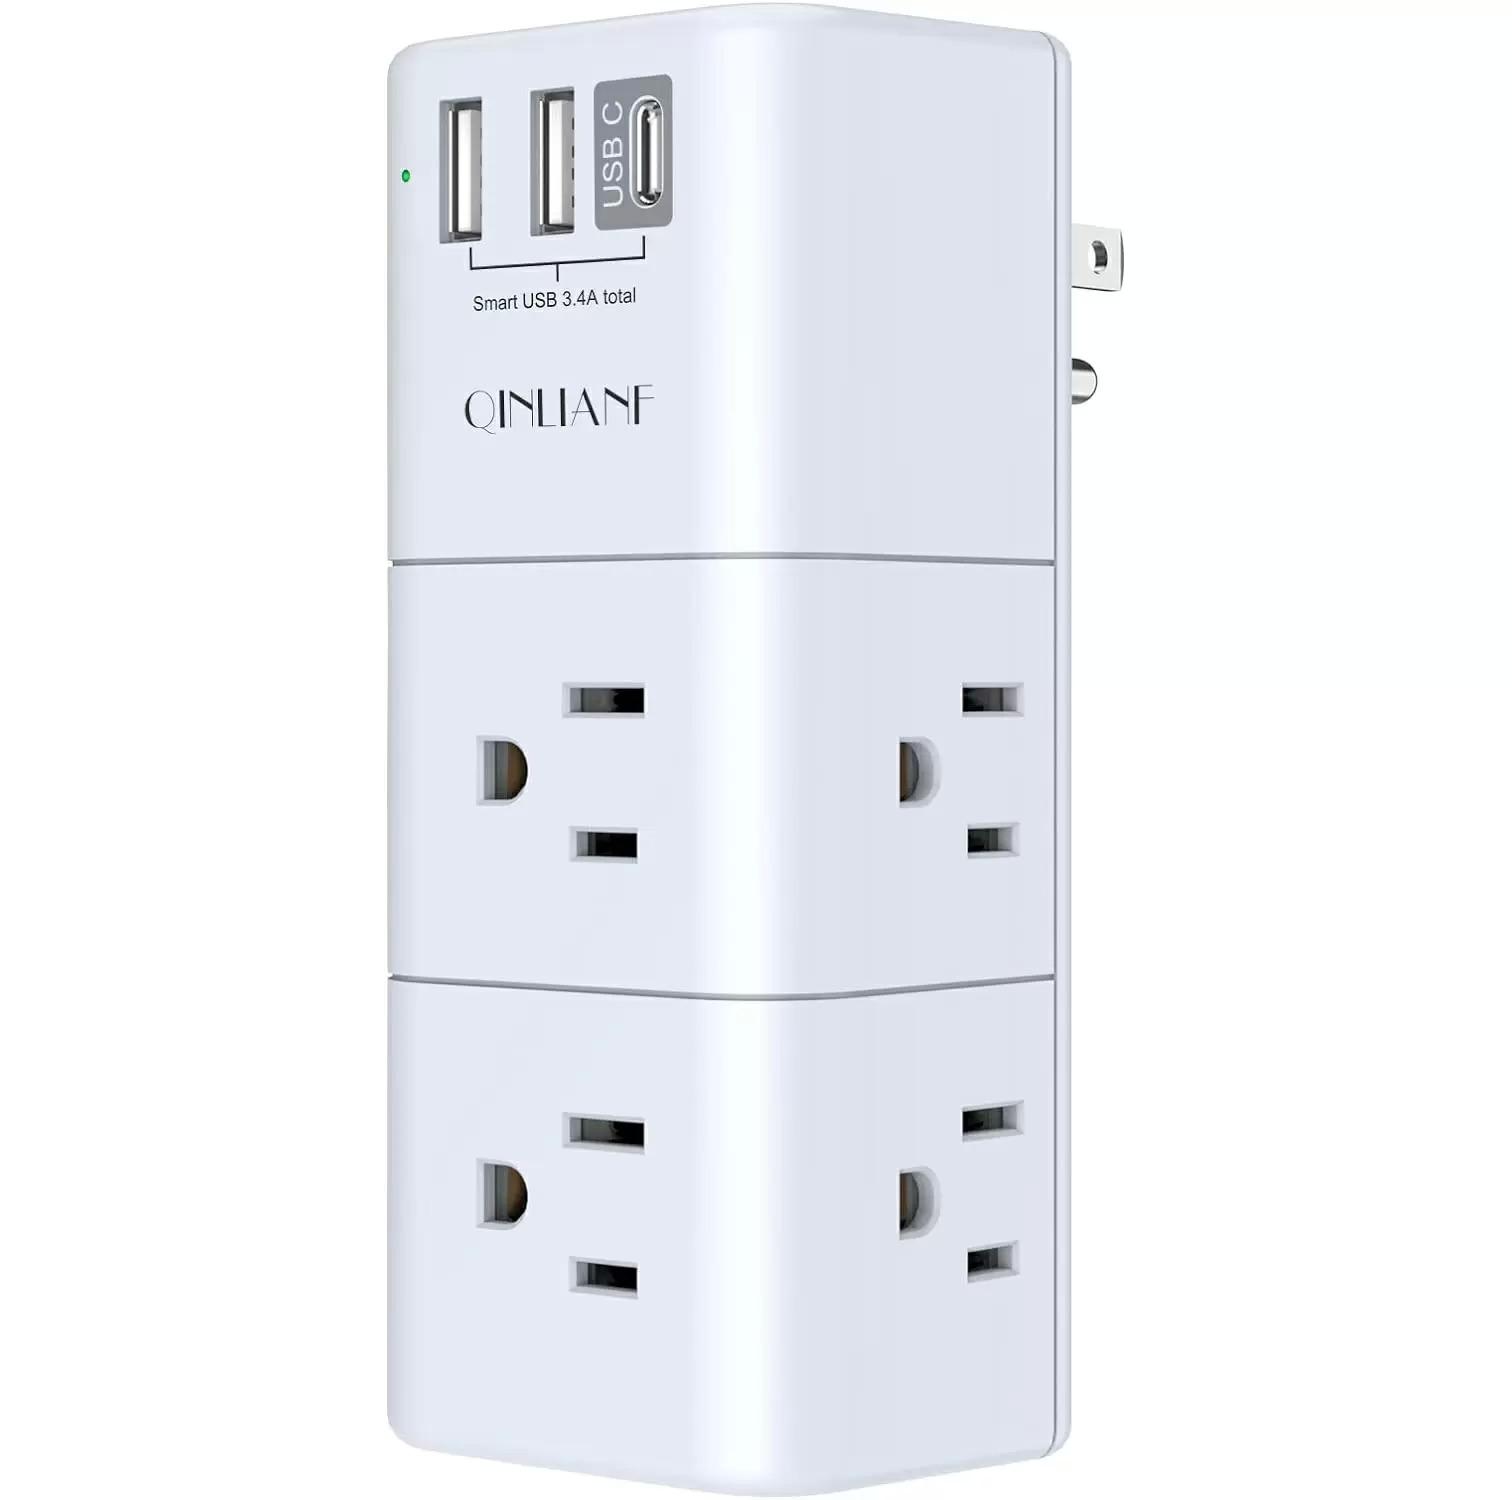 6-Outlet Power Outlet Extender with 1800 Surge Protection for $4.99